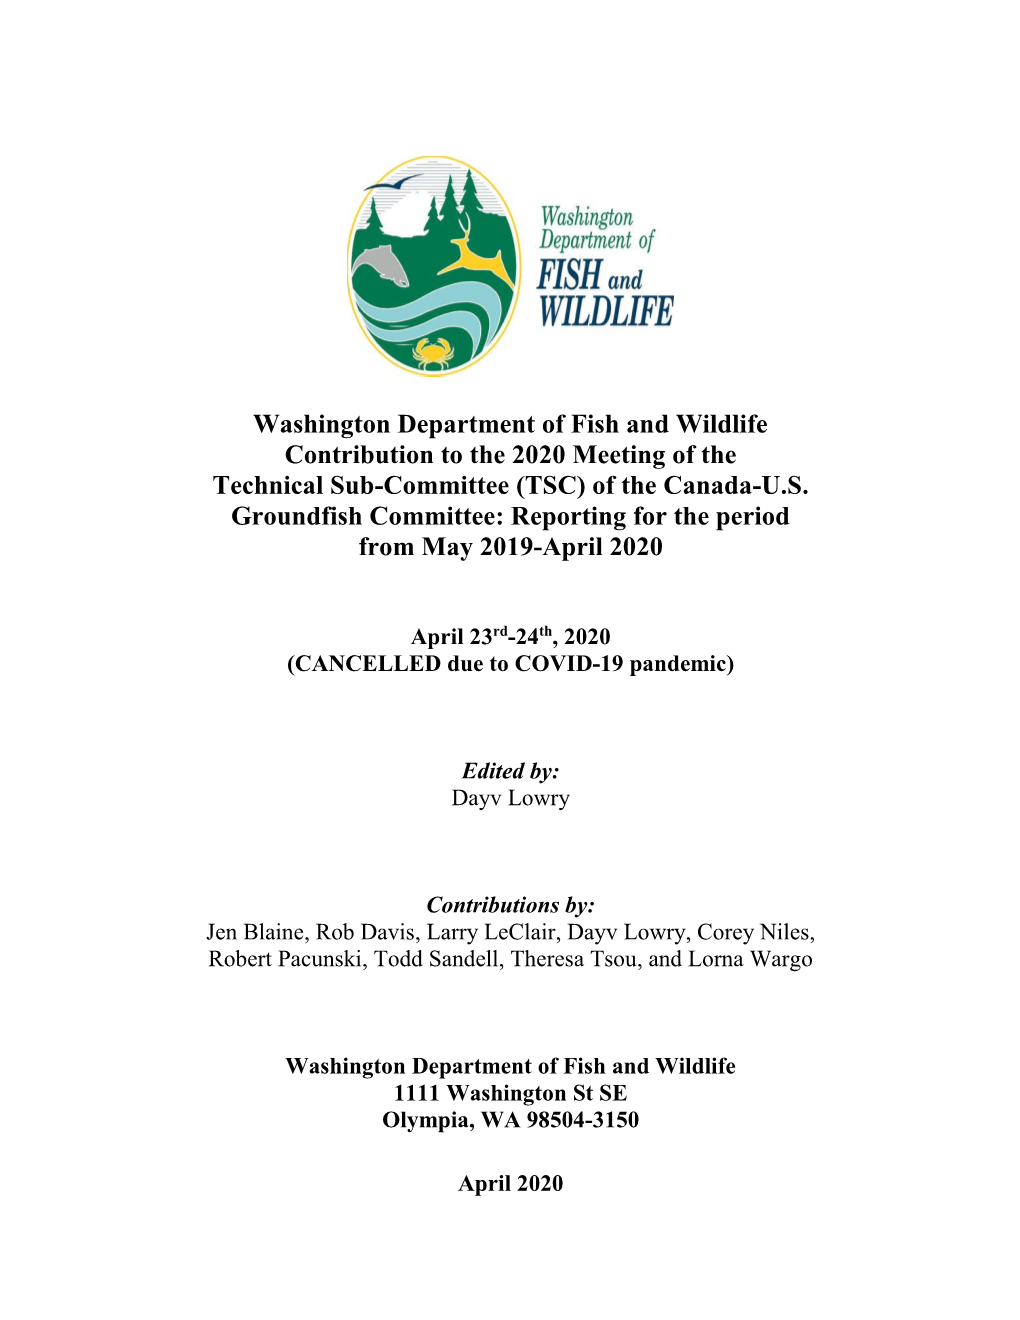 Washington Department of Fish and Wildlife Contribution to the 2020 Meeting of the Technical Sub-Committee (TSC) of the Canada-U.S